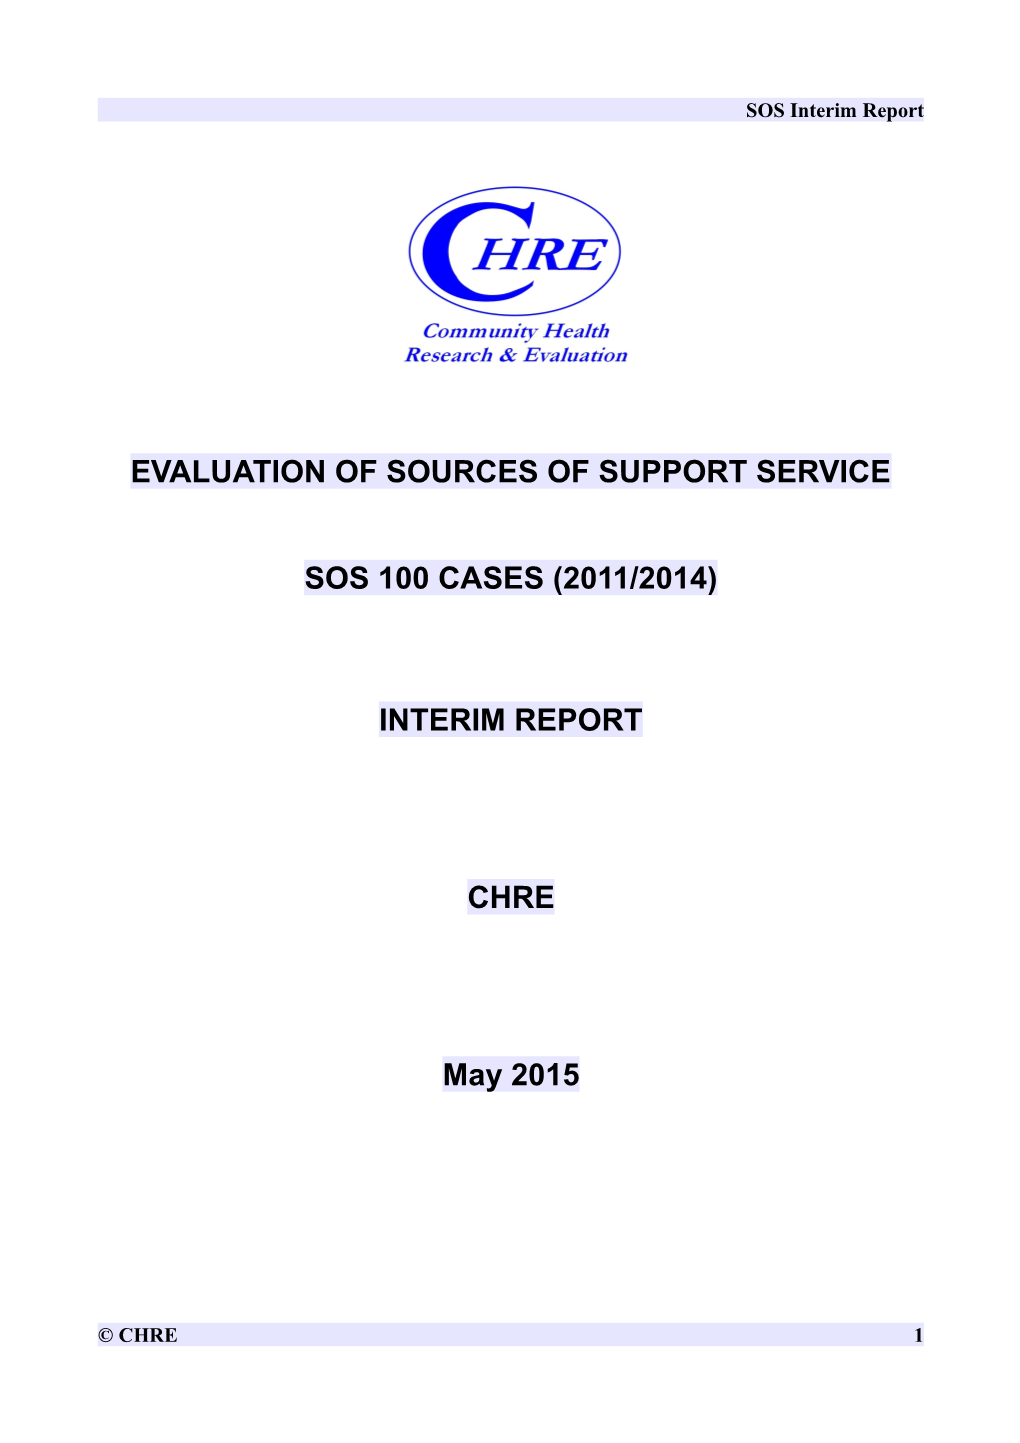 Evaluation of Sources of Support Service